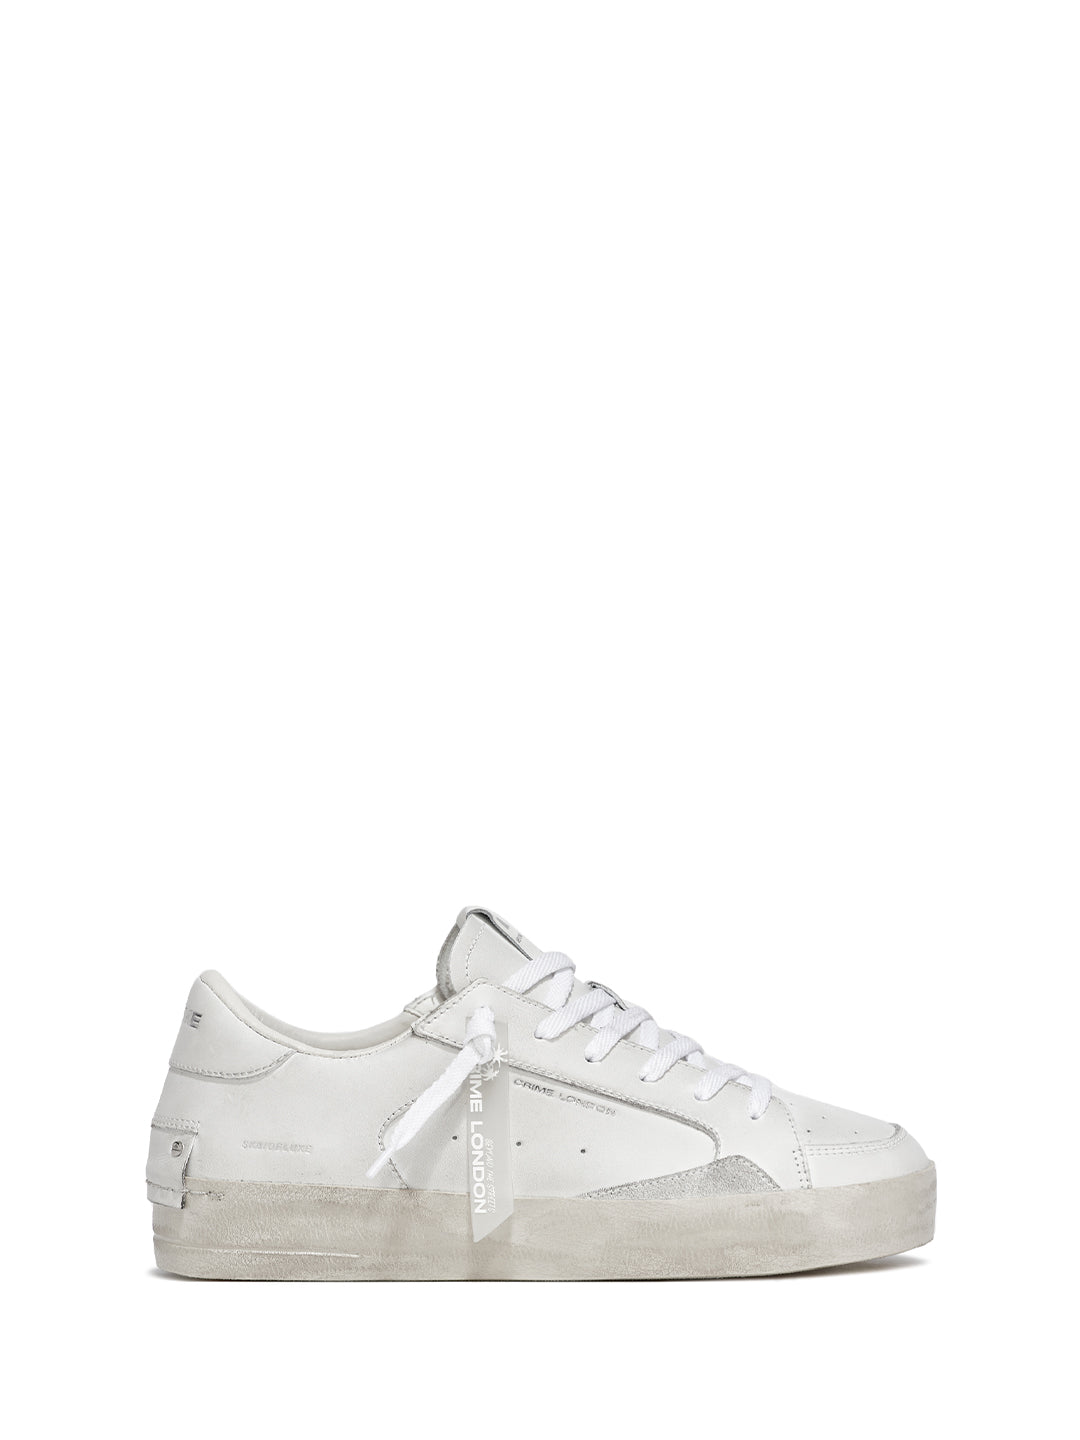 Crime SK8 Deluxe All White sneakers bianco